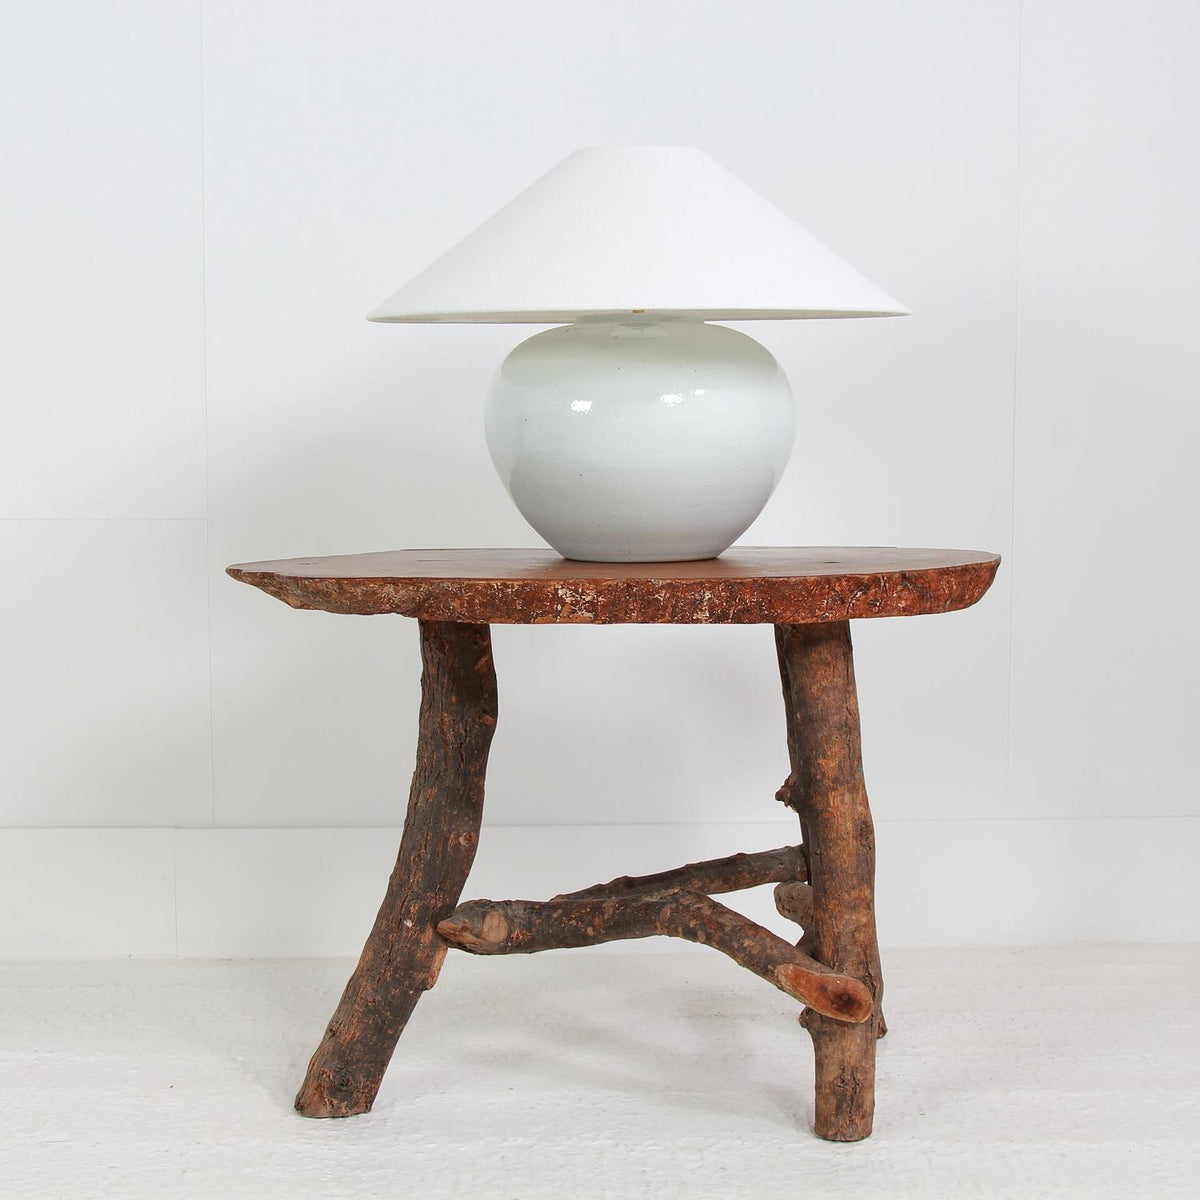 CONTEMPORARY WHITE GLAZED CERAMIC  POT LAMP WITH LINEN SHADE